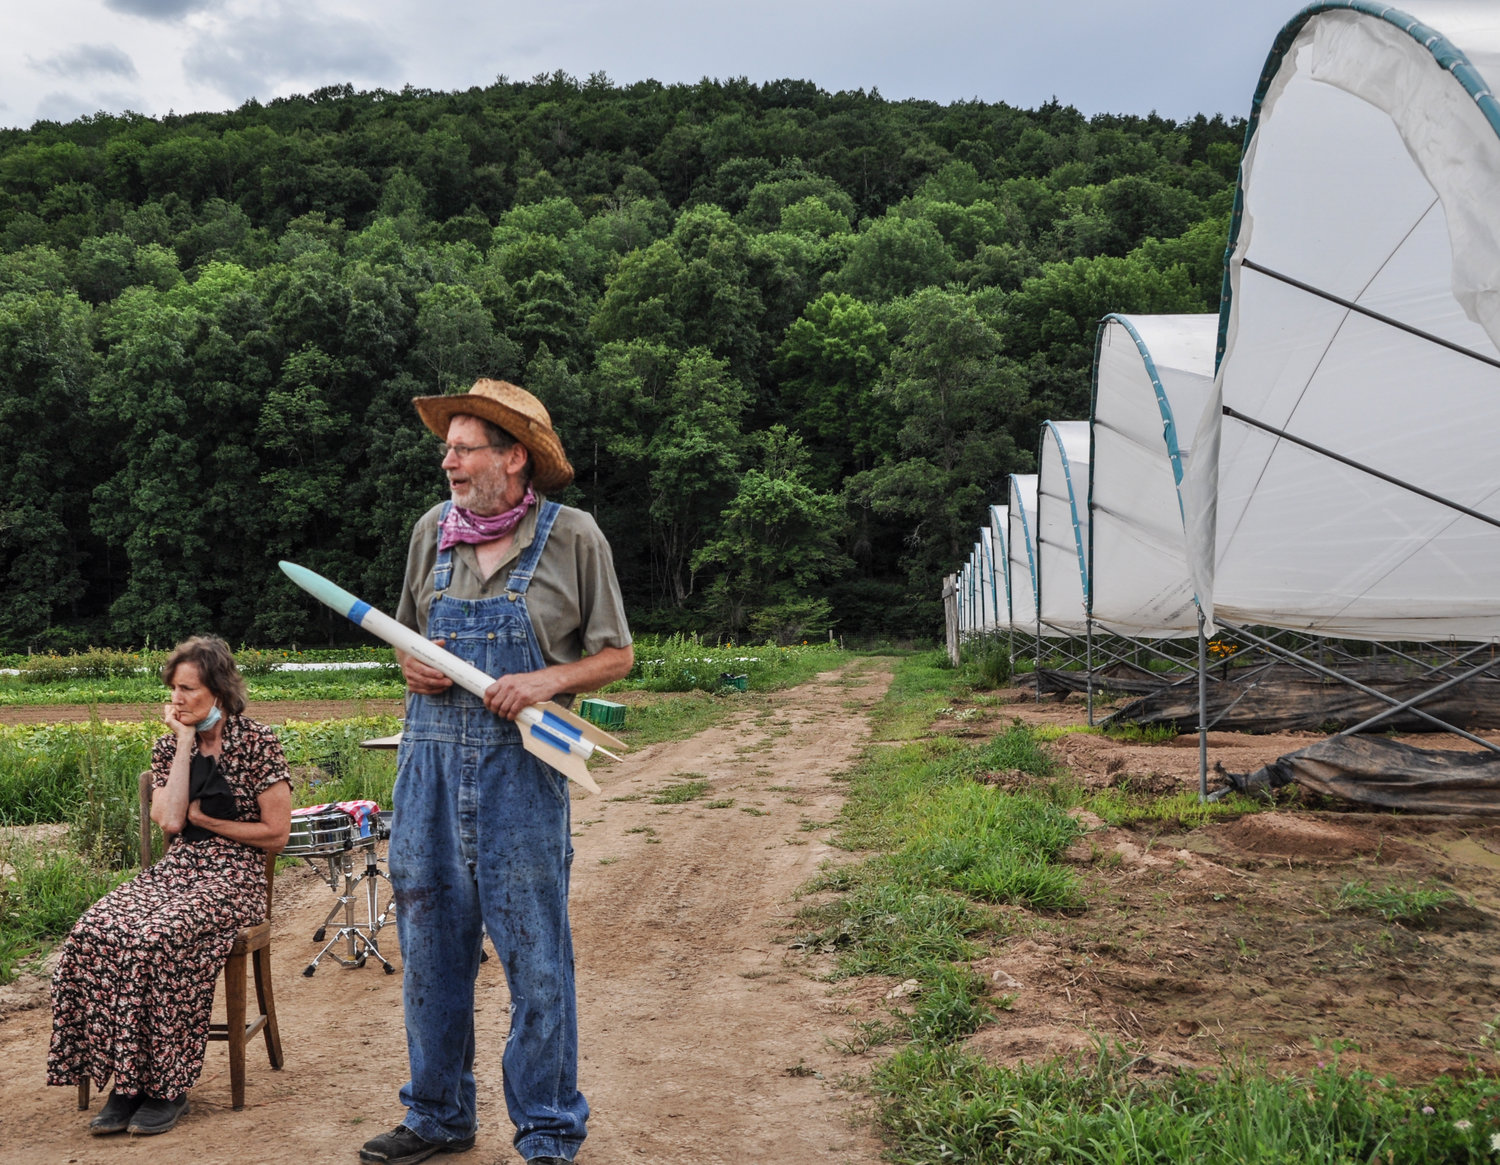 The farmer and his wife share a heartbreaking tale of loss during one of several interchangeable “Performance Pods” that make up the visually striking Farm Arts Collective’s “Dream on the Farm.”